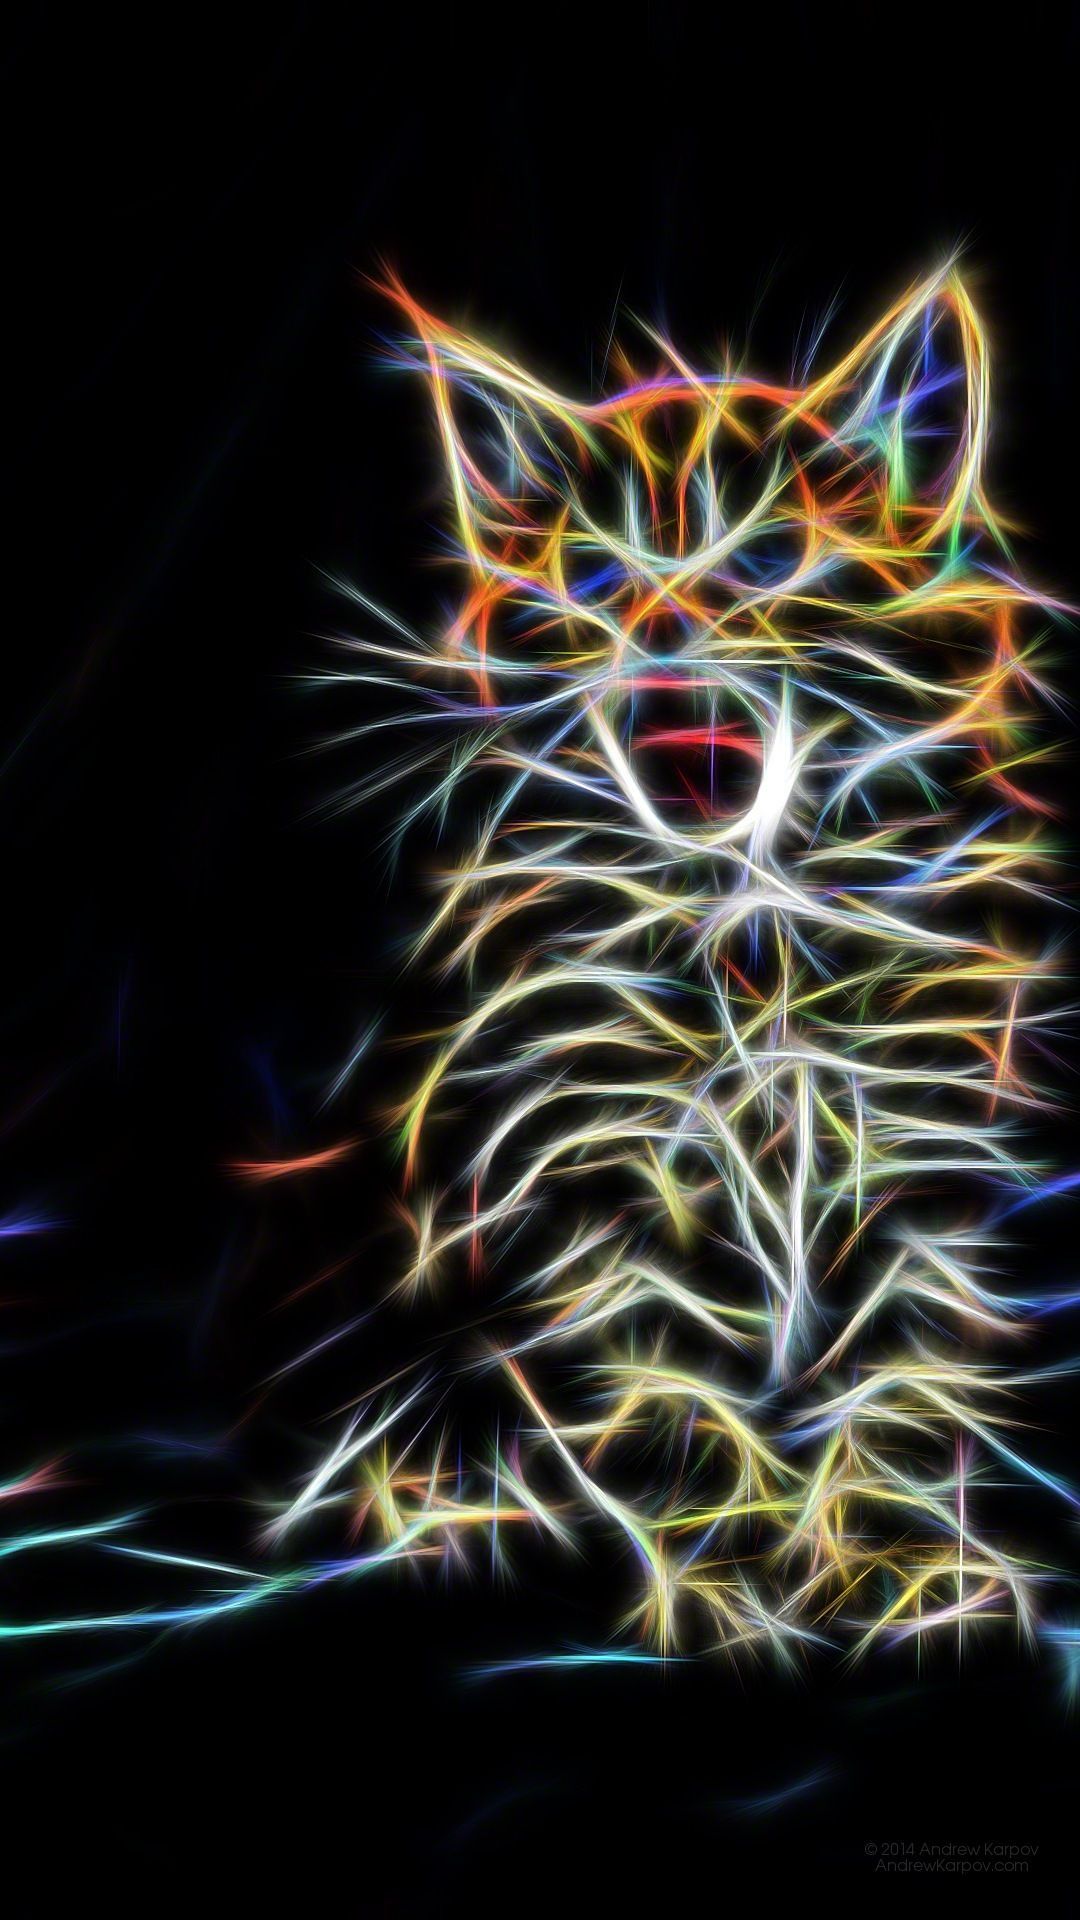 Cats made of fantasy - Photography Art - 1080 x 1920 background